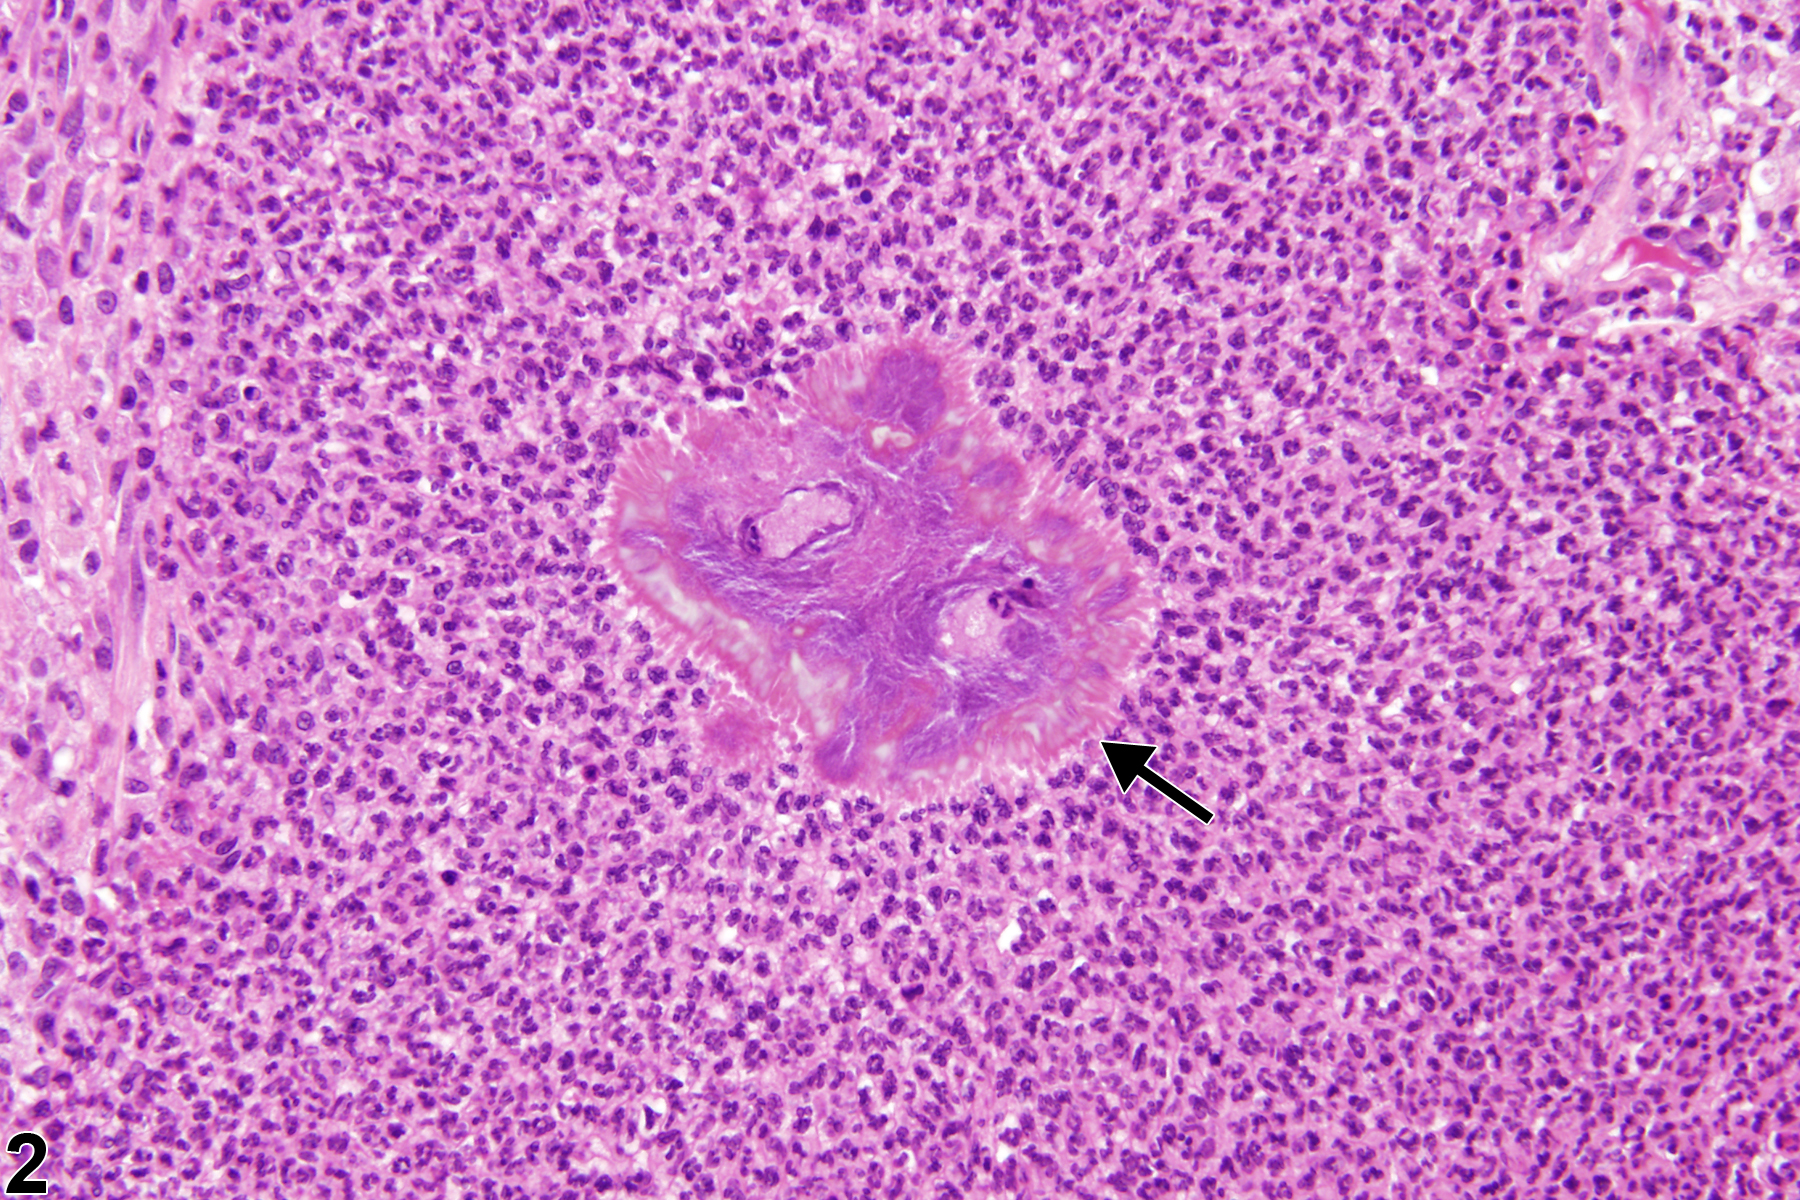 Image of inflammation in the nose, respiratory epithelium from a male F344/N rat in a chronic study